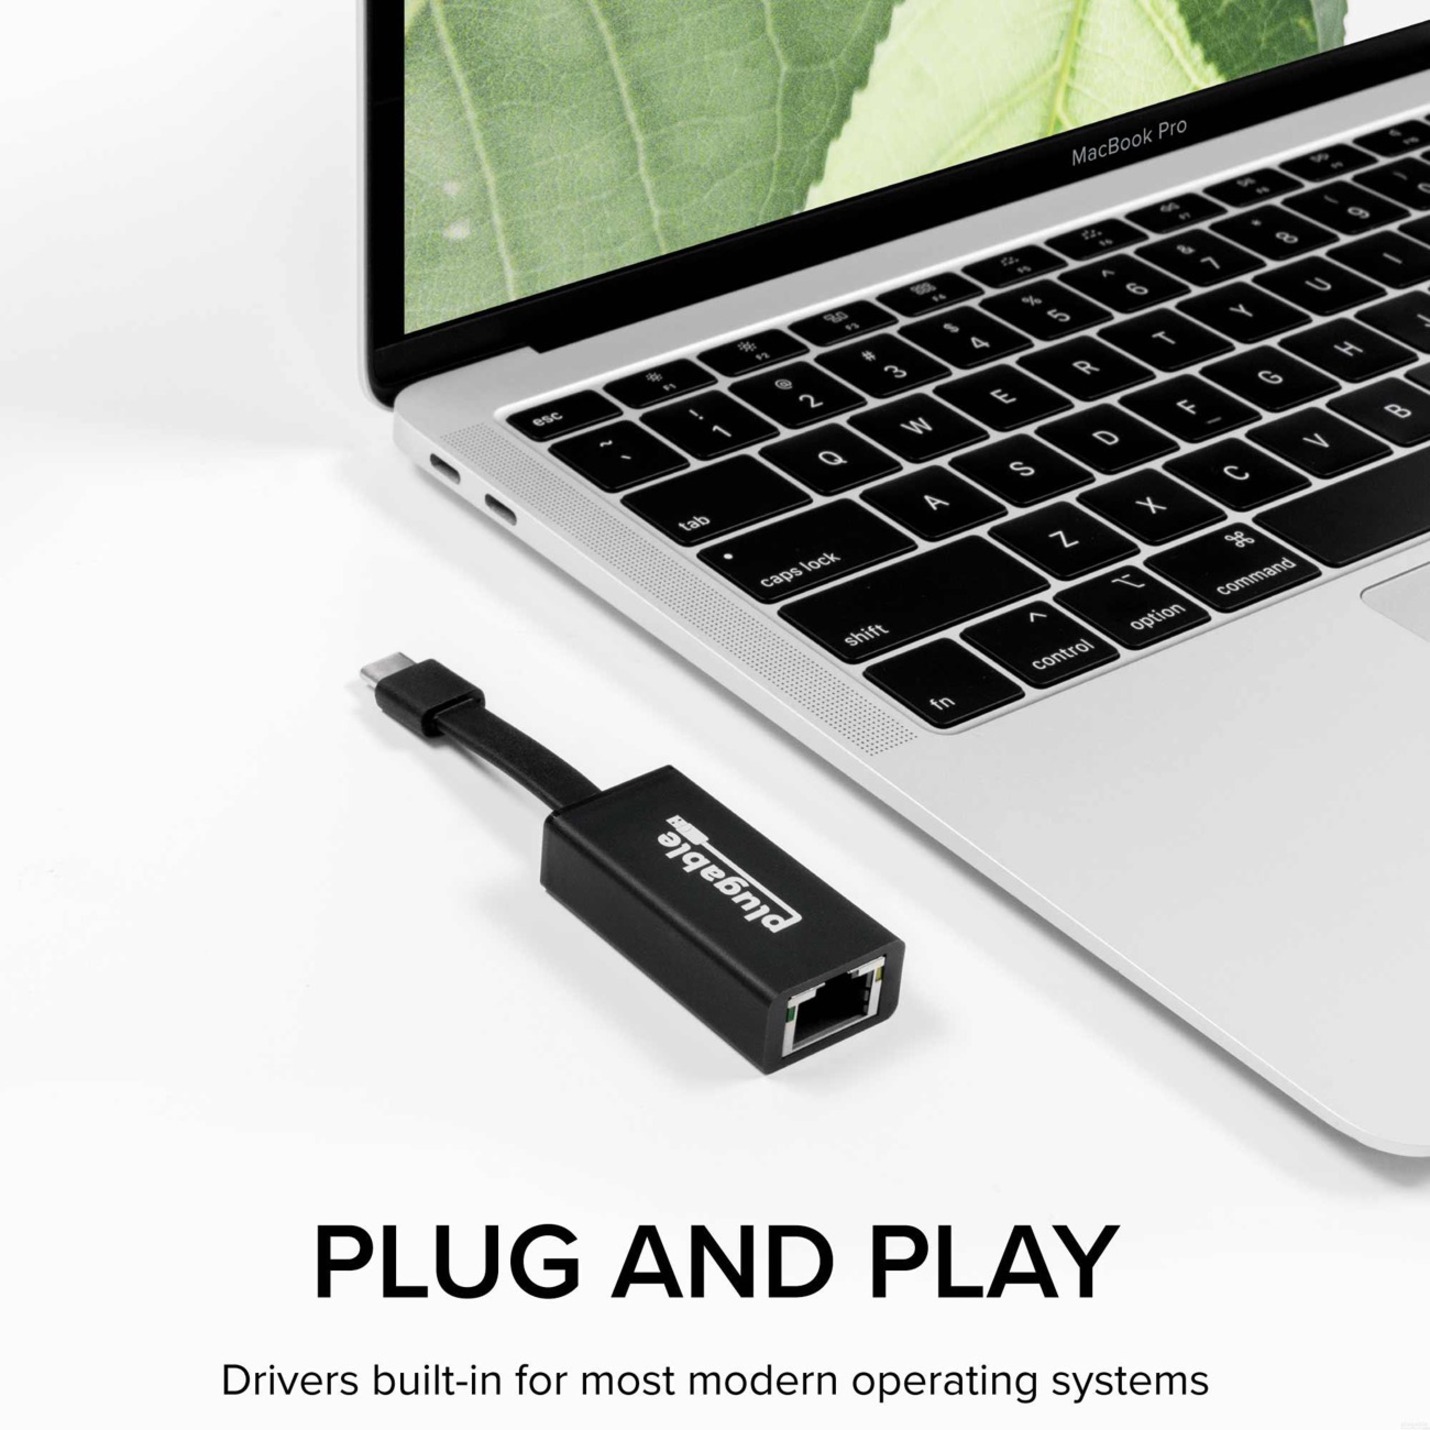 Plugable USB C to Ethernet Adapter, Driverless Fast and Reliable Gigabit Speed, Thunderbolt 3 to Ethernet Adapter Compatible with Macbook Pro, Windows, macOS, iPhone 15, and ChromeOS - image 4 of 8